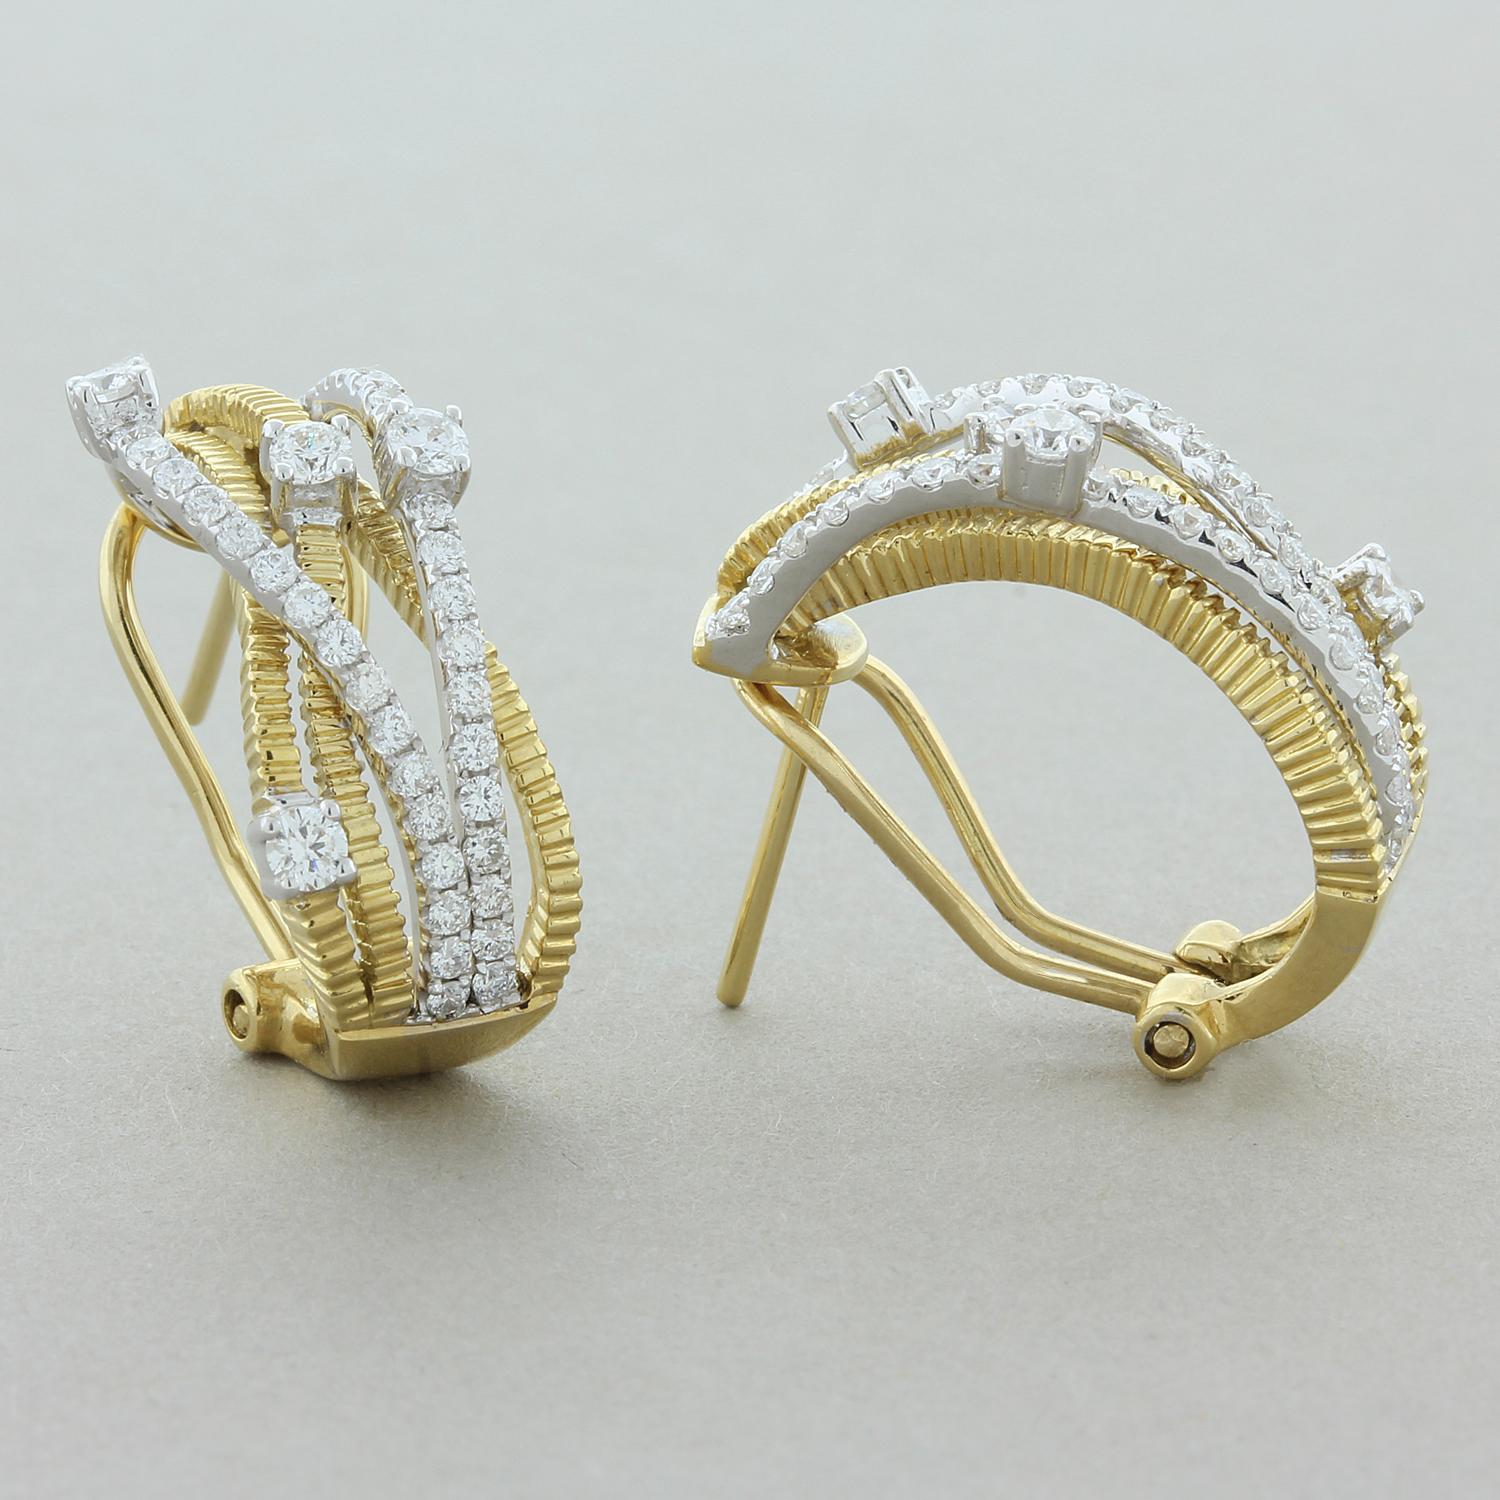 A fabulous pair of earrings featuring 0.98 carats of round brilliant cut diamonds. They are set in a curved two-tone 18K yellow and white gold setting adding to the look of these playful earrings. A great pair of earrings that can be worn day or